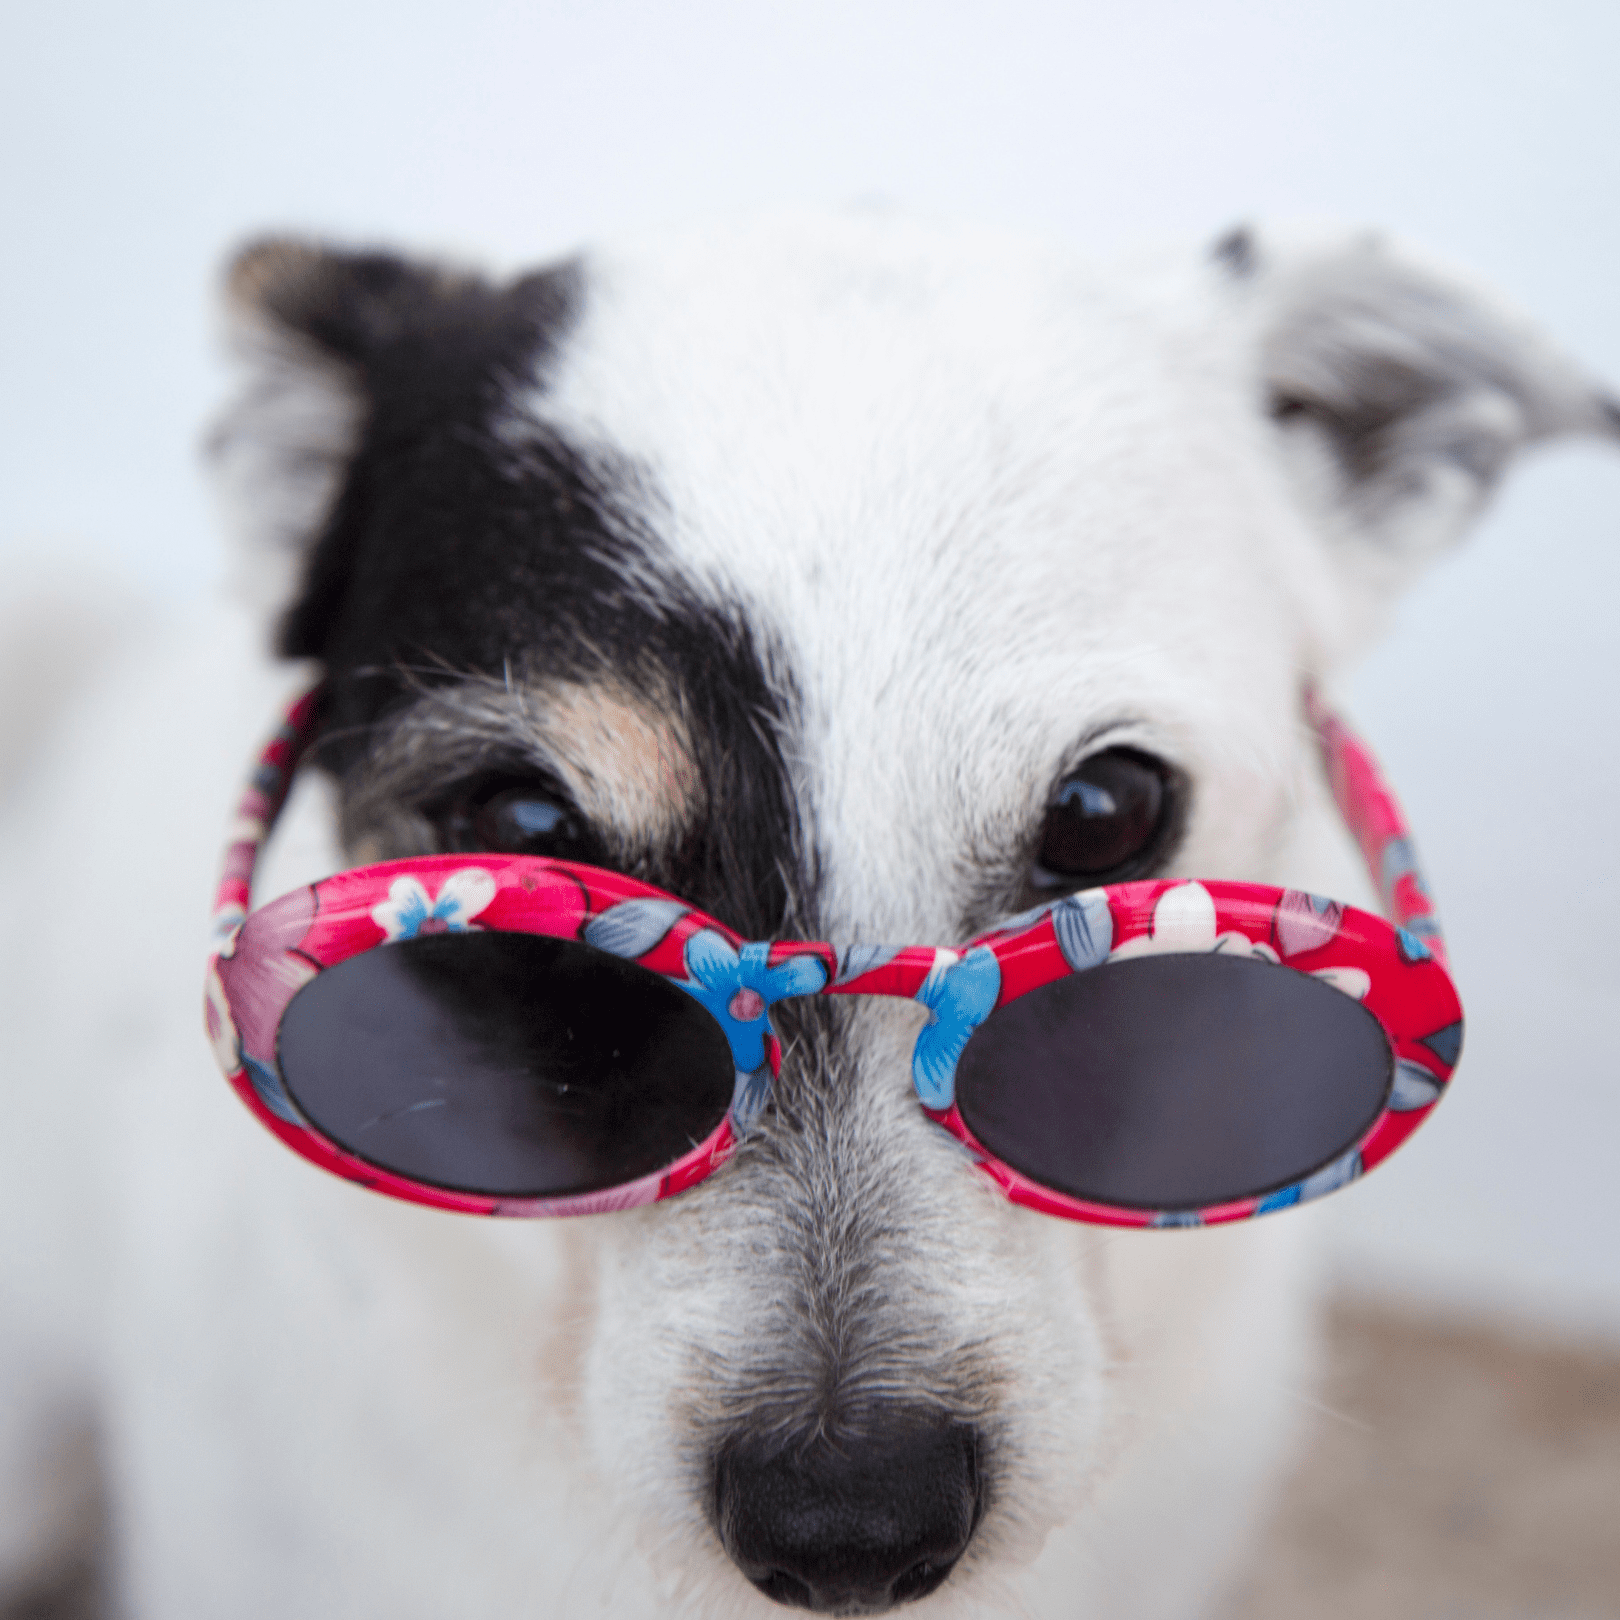 small mostly white dog wearing red sunglasses